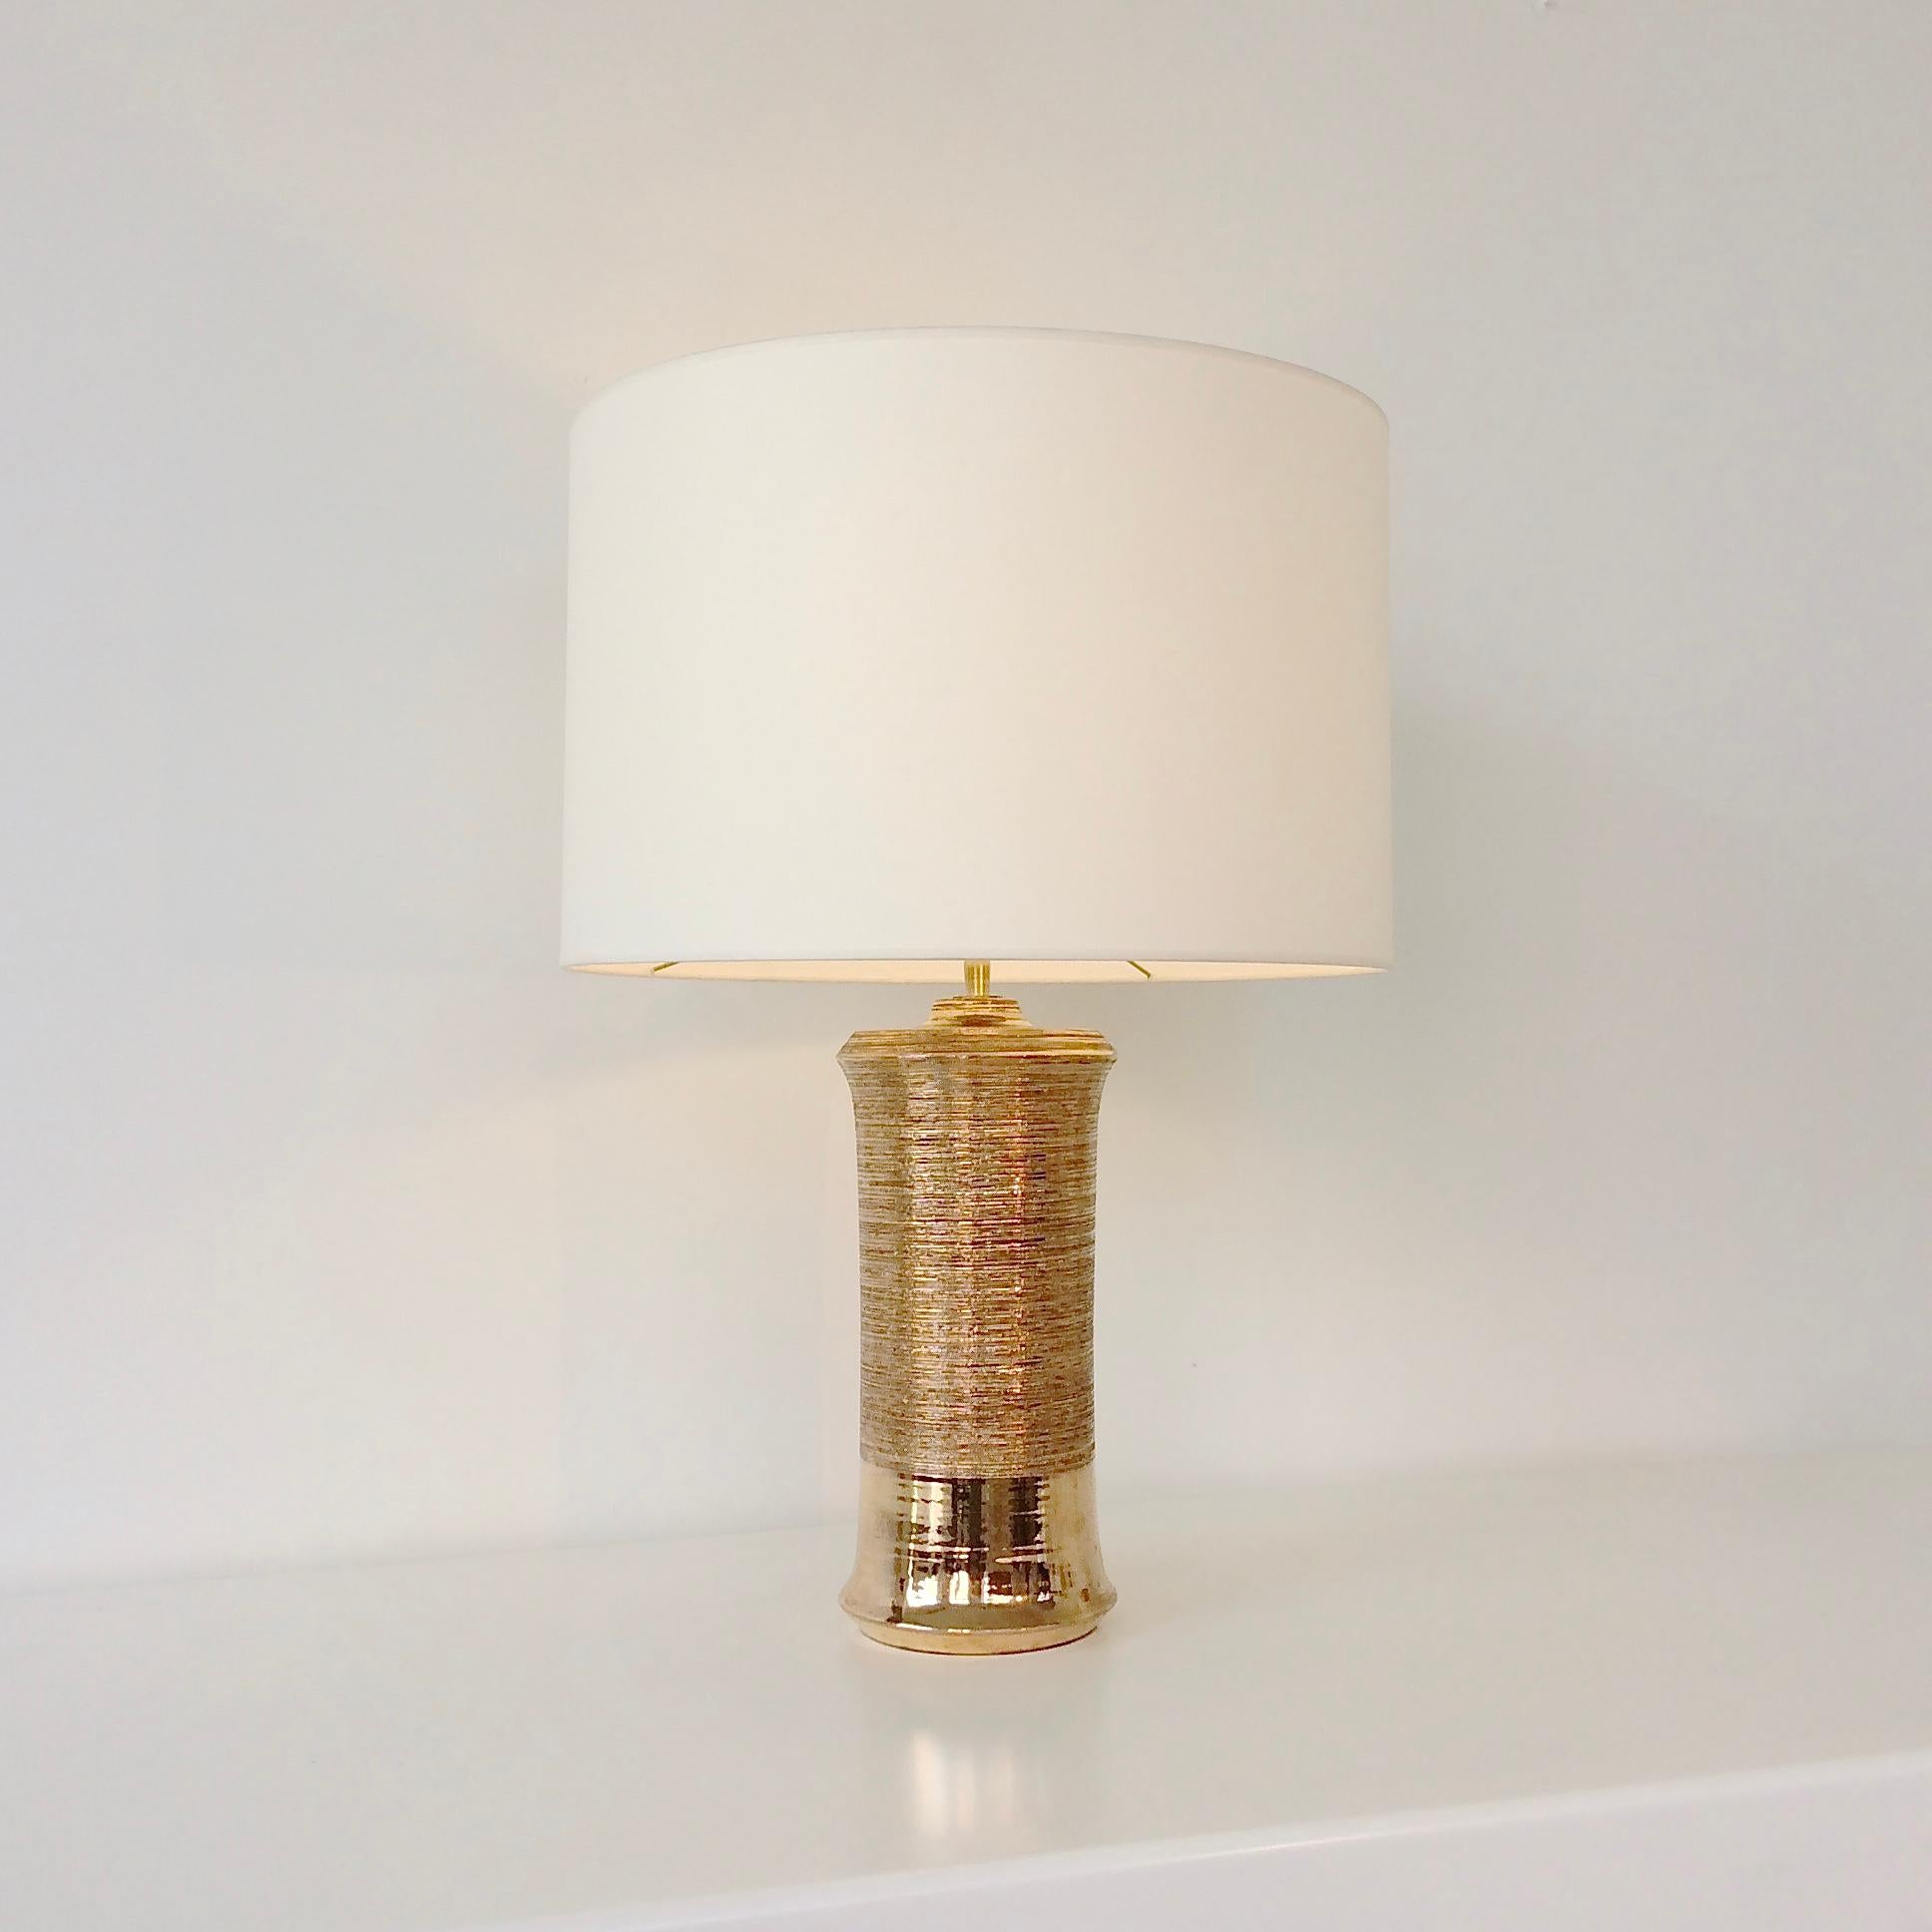 Bitossi large ceramic table lamp, circa 1970, Italy.
Gold ceramic, new white fabric.
Rewired. One E27 bulb of 60W.
Dimensions: 67 cm total height, diameter of the shade : 47 cm.
Good condition.
All purchases are covered by our Buyer Protection